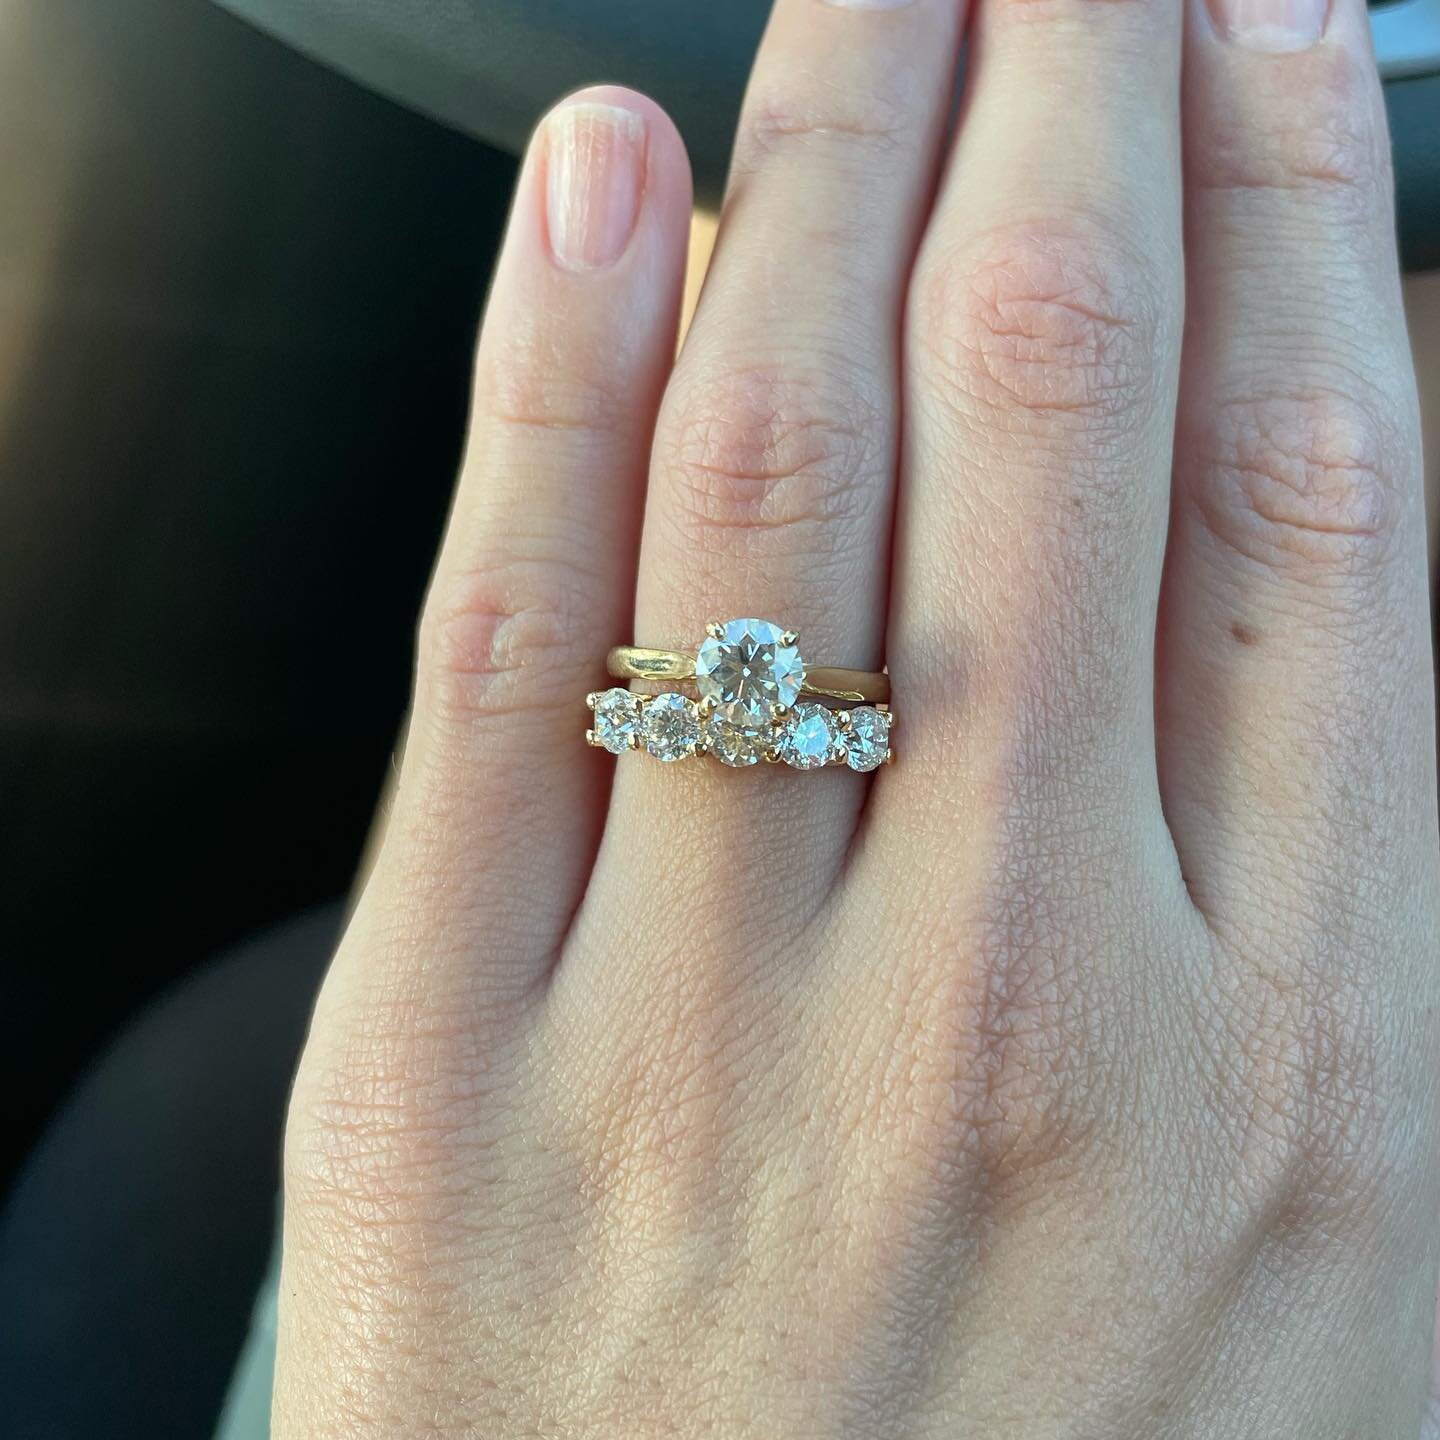 Yellow gold is knocking our socks off this week! This TDH client chose our signature 5-stone scallop ring with 0.30ct round diamonds for her wedder. We think it complements her beautiful solitaire engagement ring perfectly 🤩👌💛